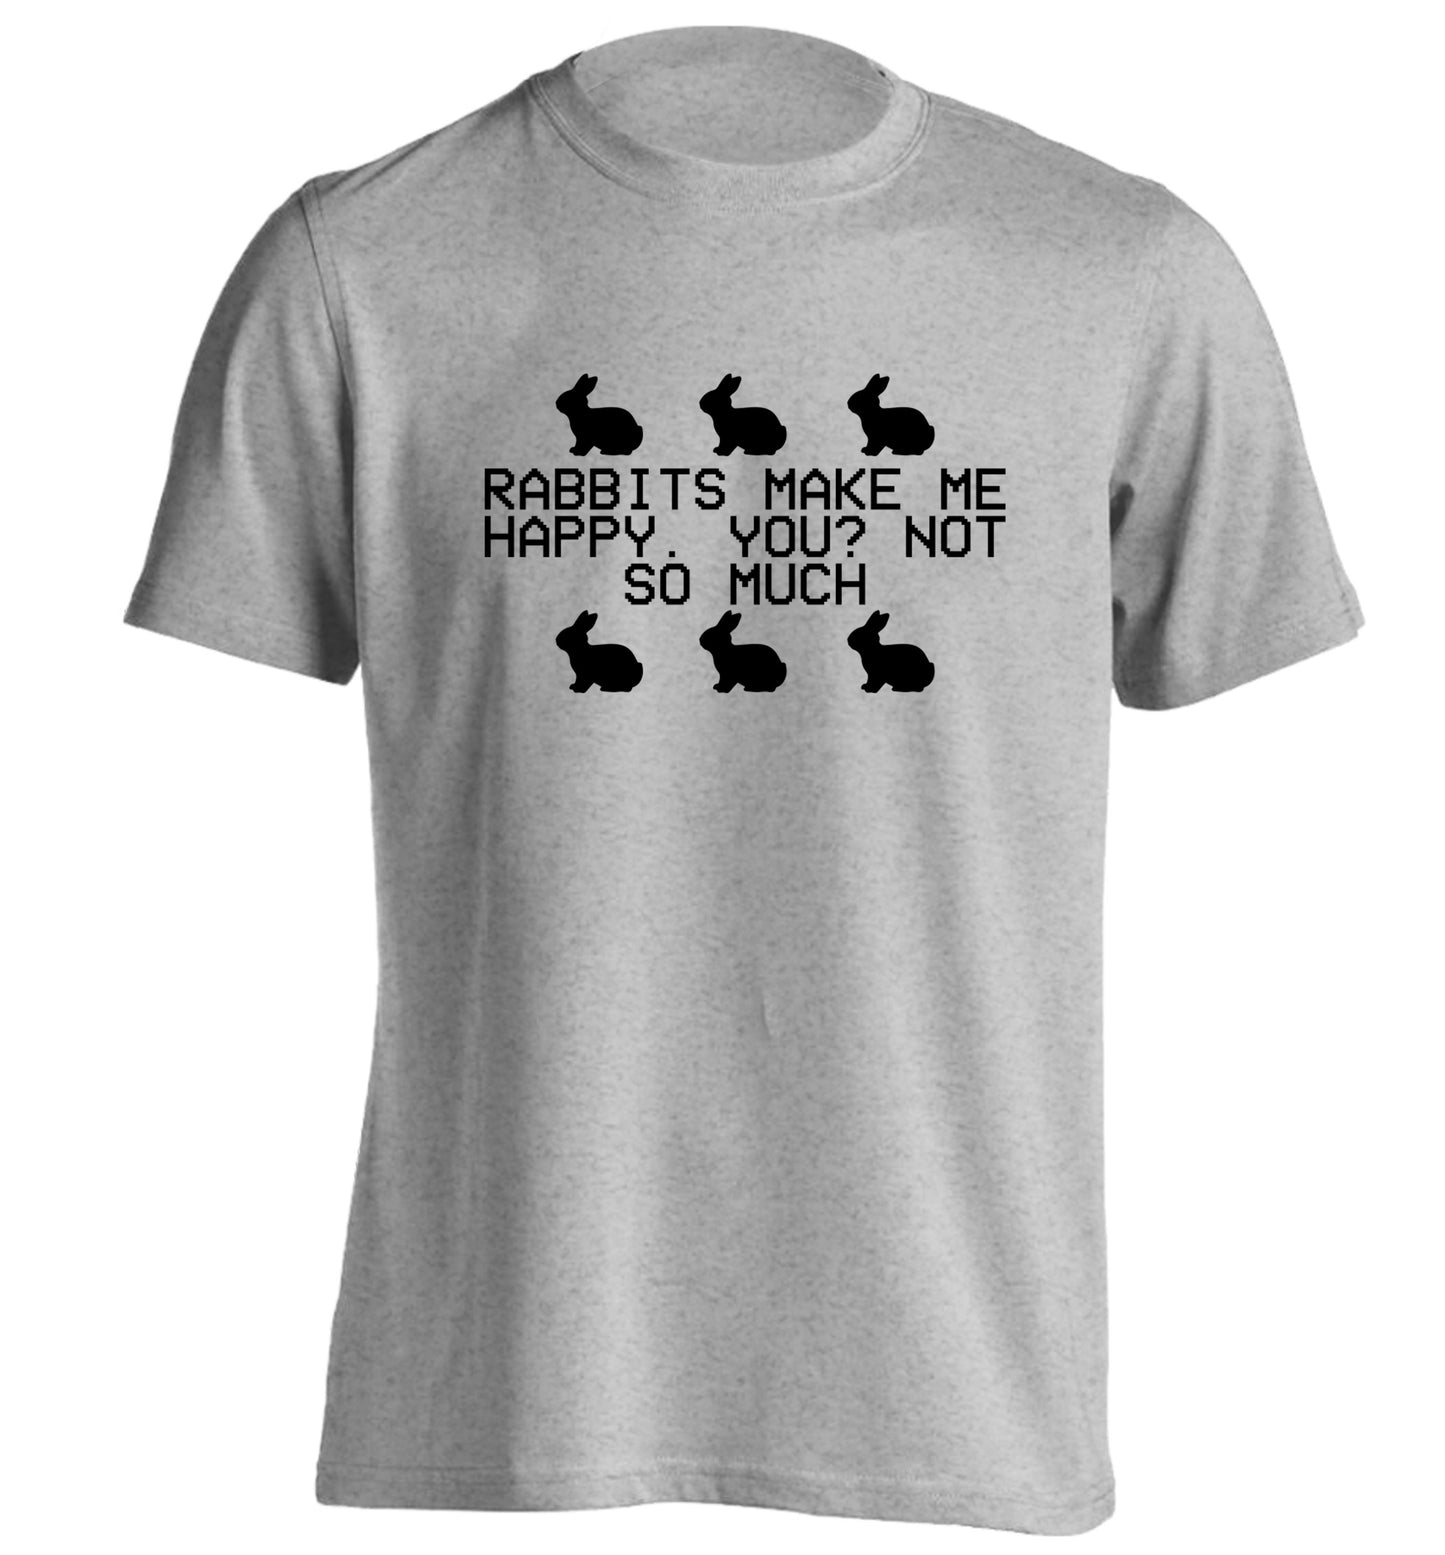 Rabbits make me happy, you not so much adults unisex grey Tshirt 2XL